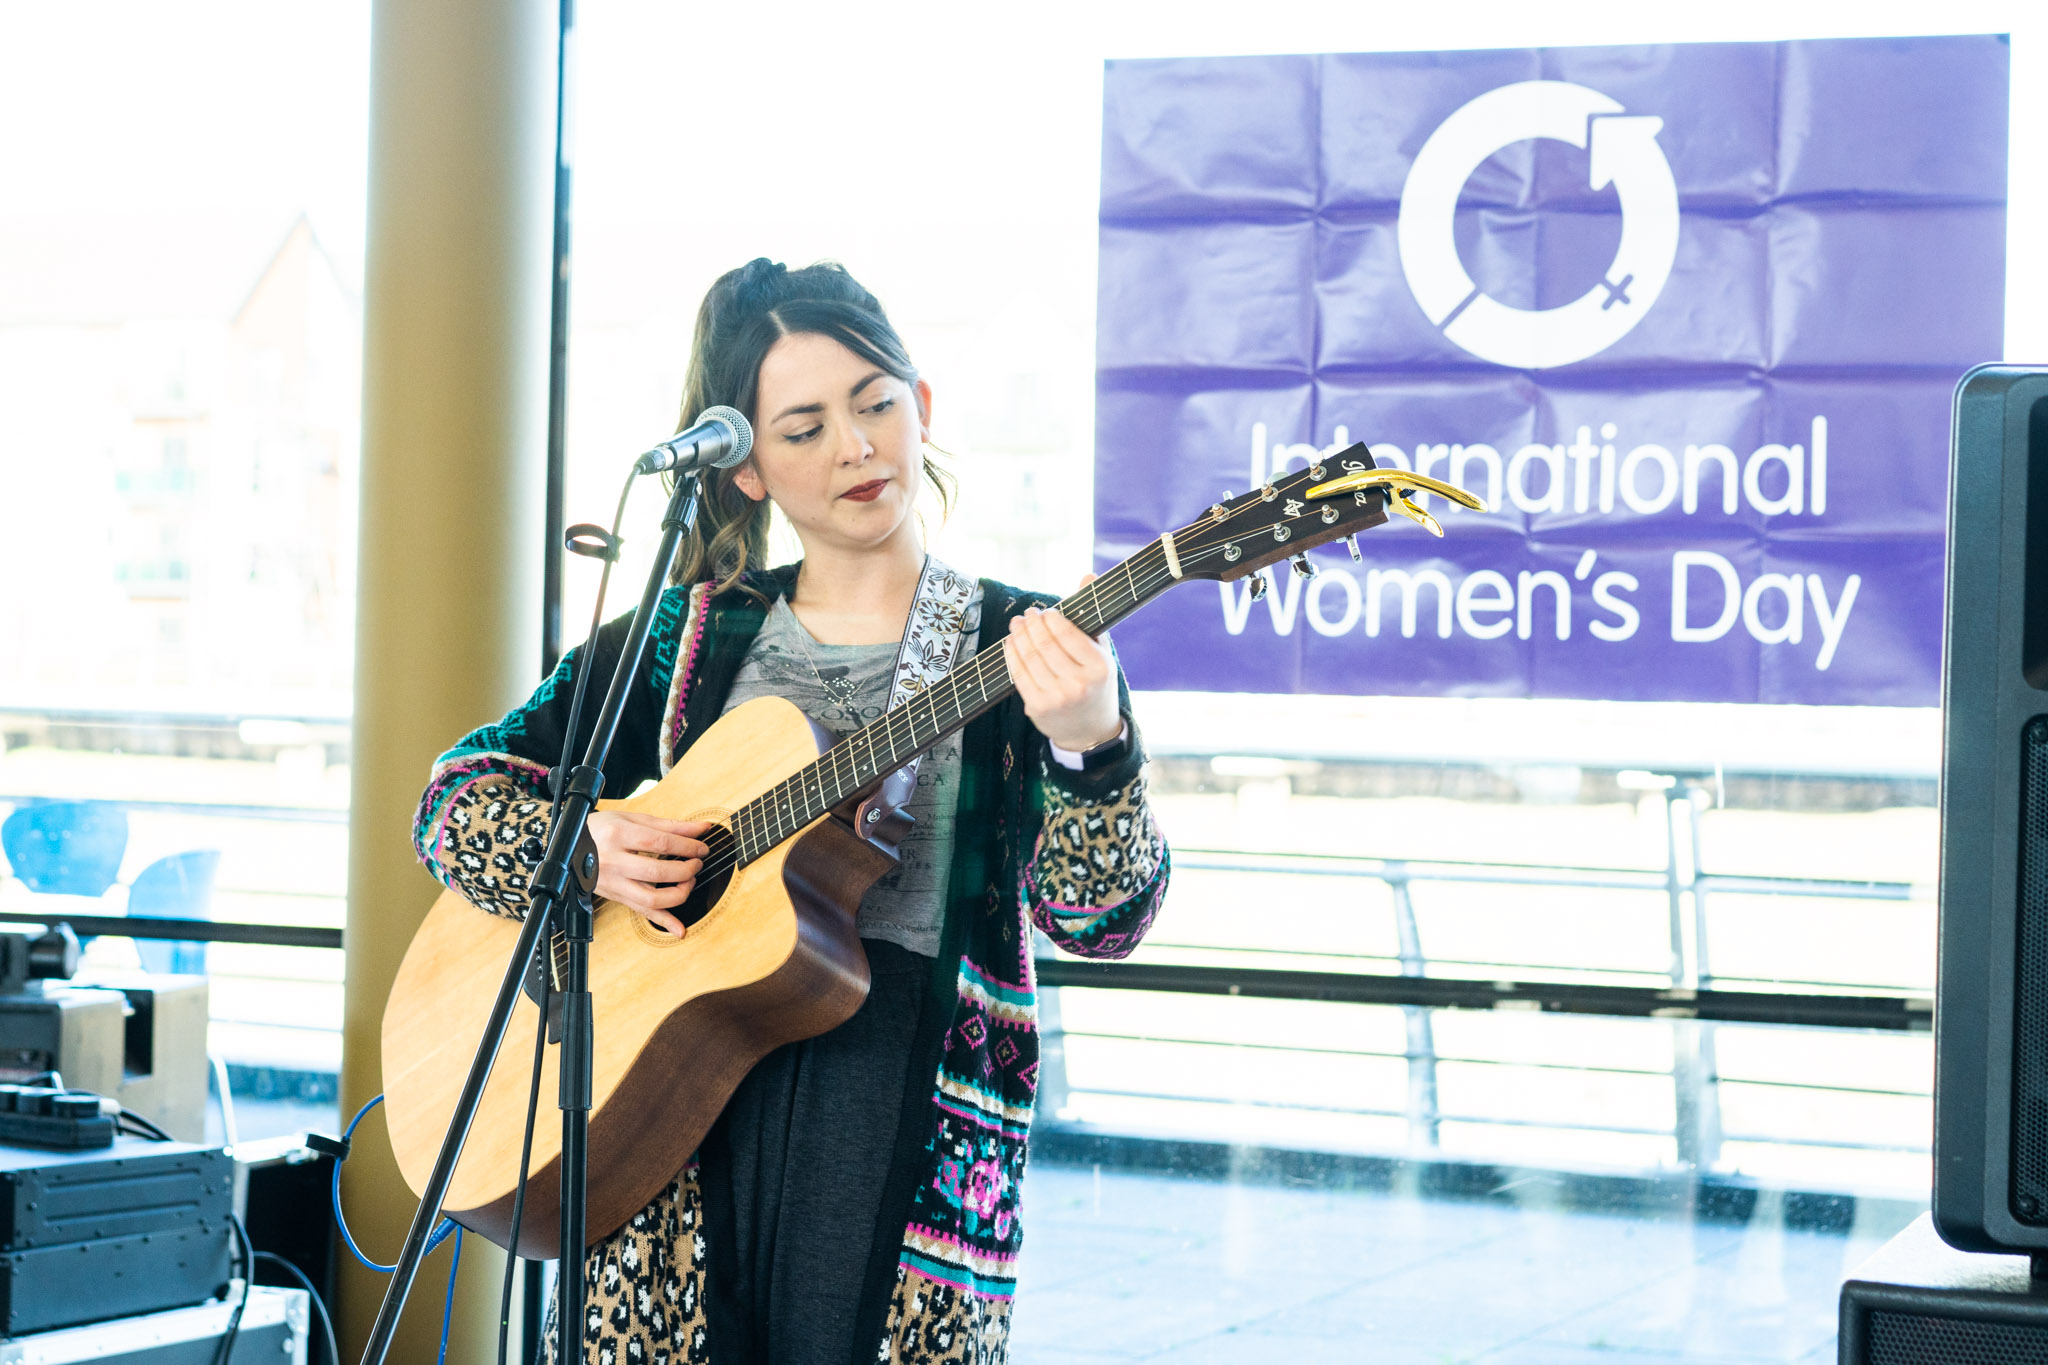 lady with a guitar performing in from of a purple IWD flag